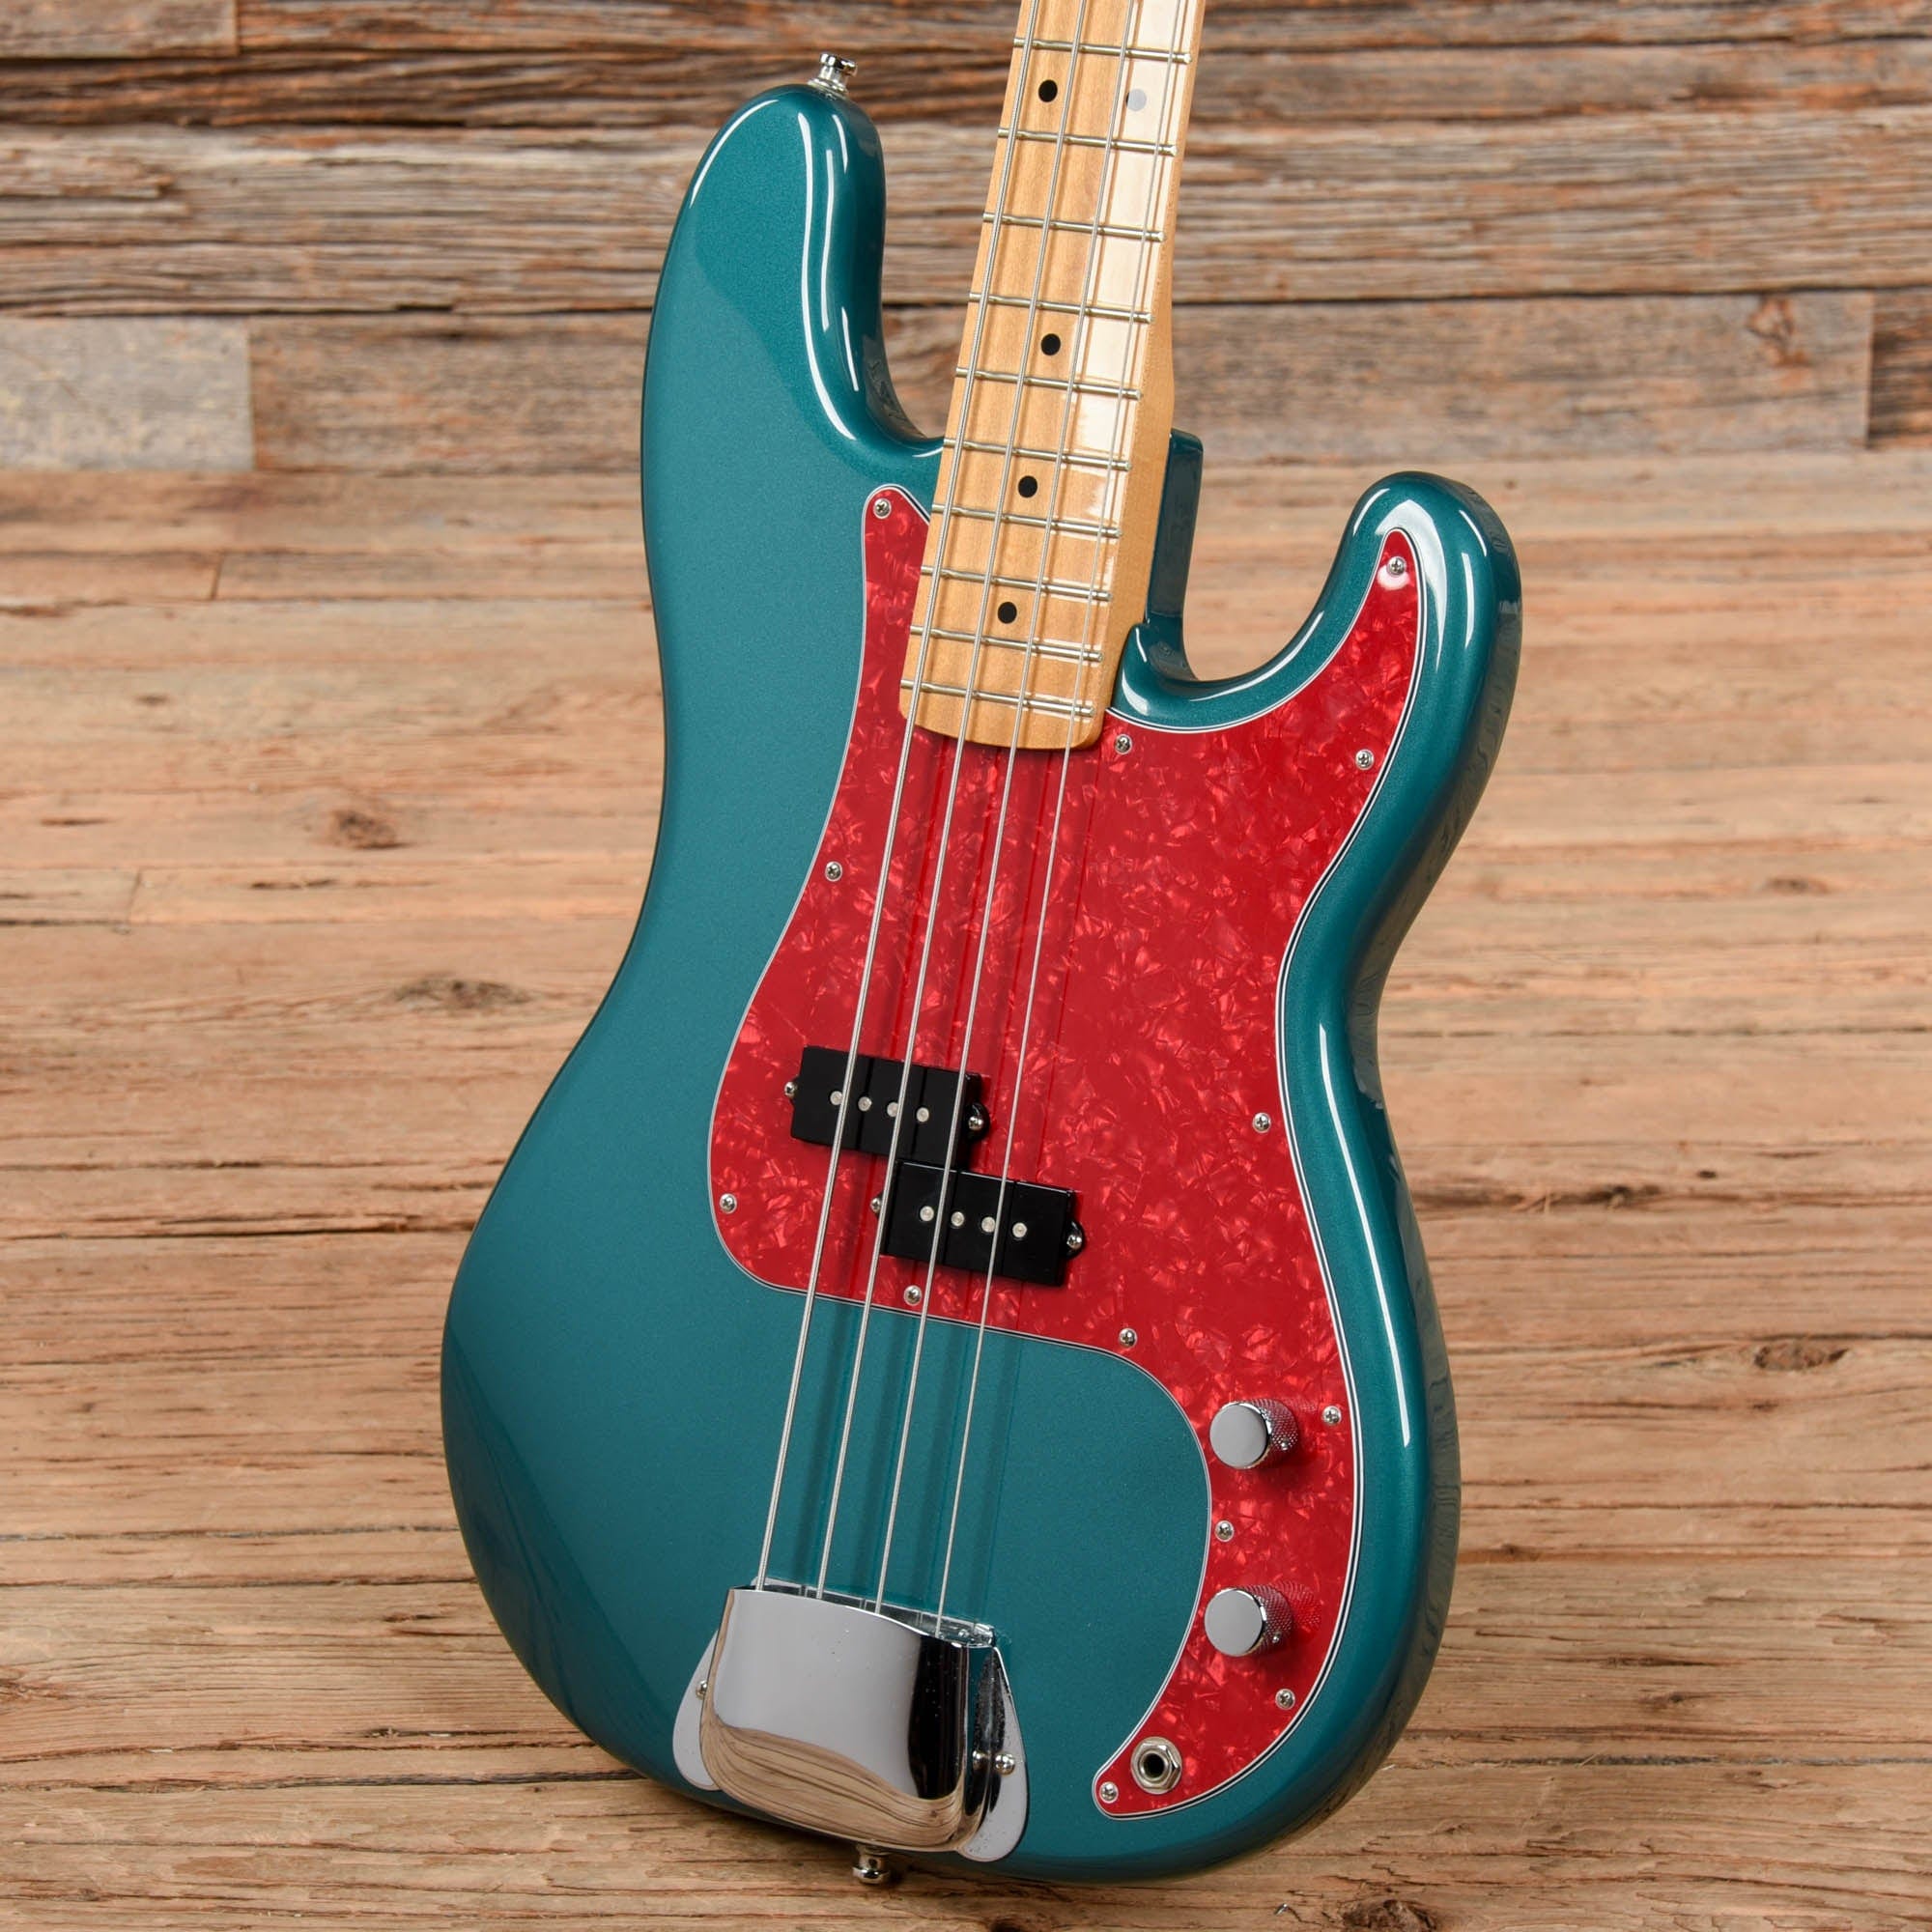 Fender Limited Edition Standard Precision Bass Ocean Turquoise 2018 Bass Guitars / 4-String